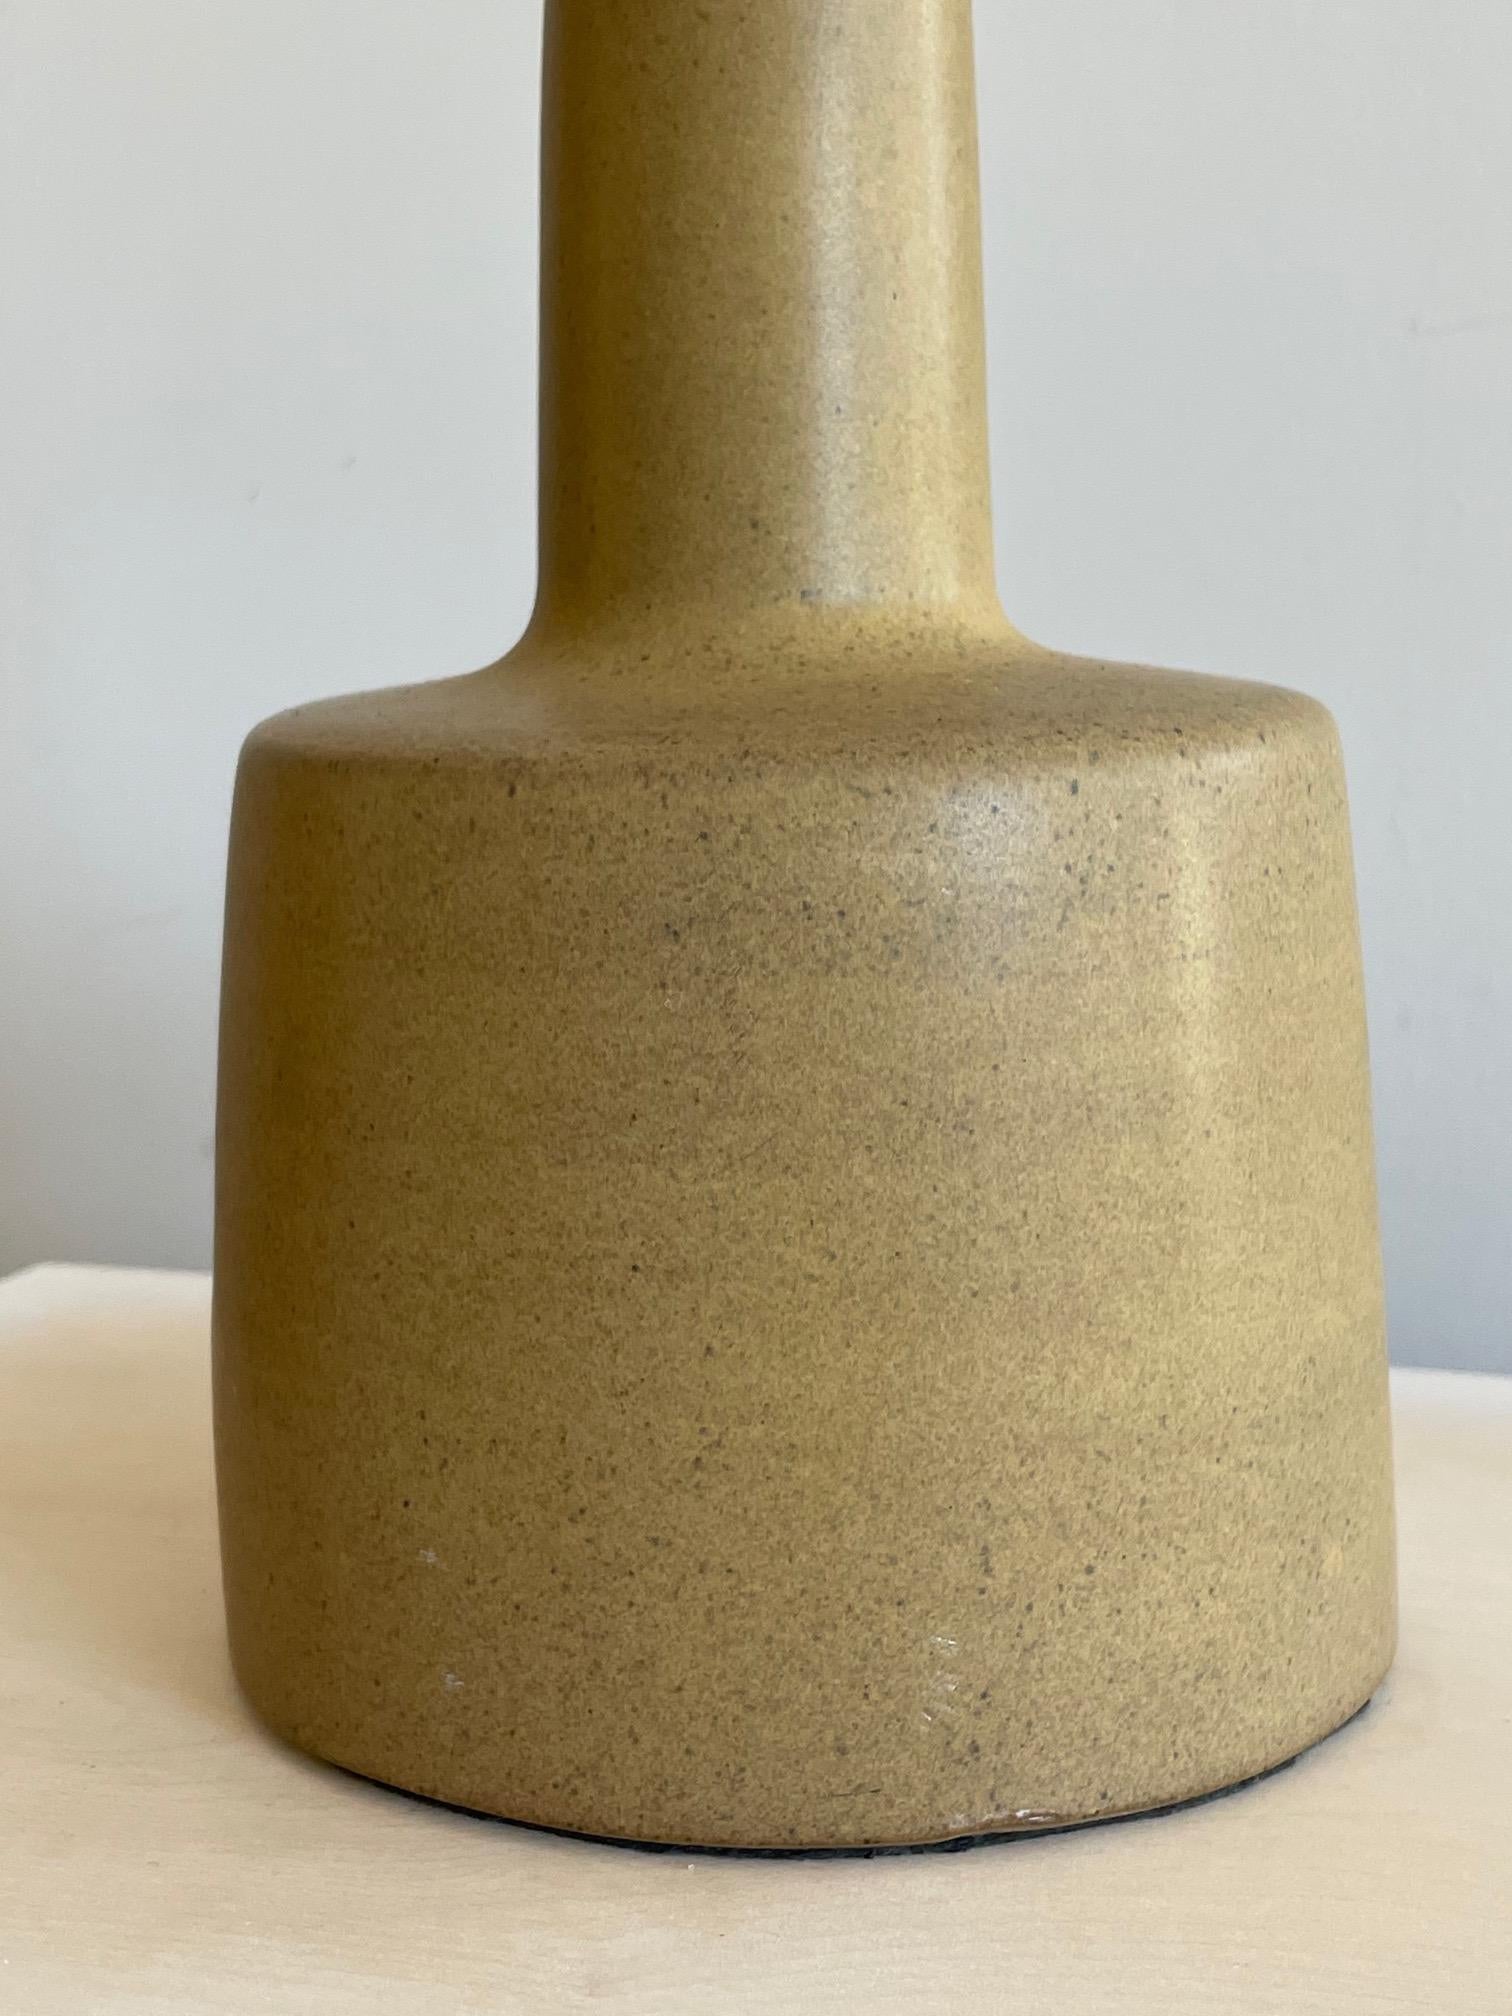 A classic petite lamp by Gordon and Jane Martz for Marshall Studios ca' 1960's. Mustard/earthy tone color with a satin glaze, the form is simple and sculptural. The lamp measures approx. 6